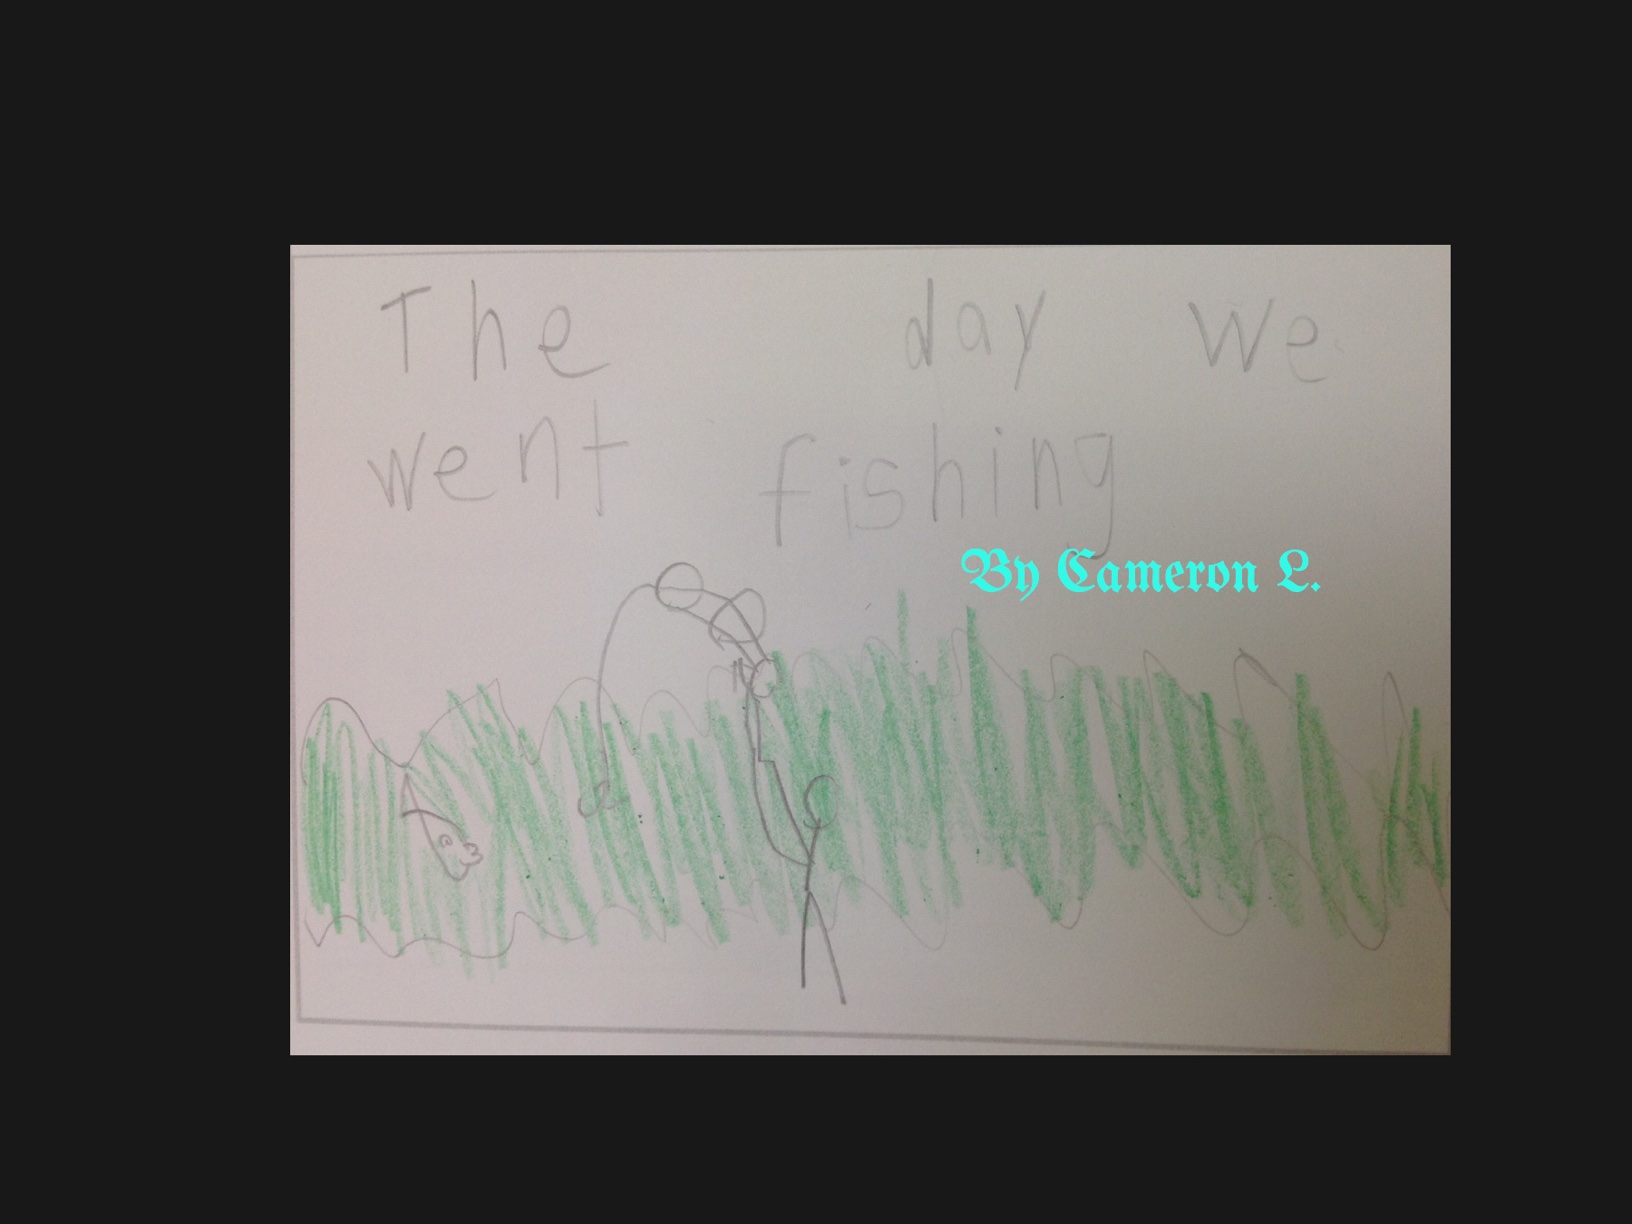 The Day We Went Fishing by Cameron L